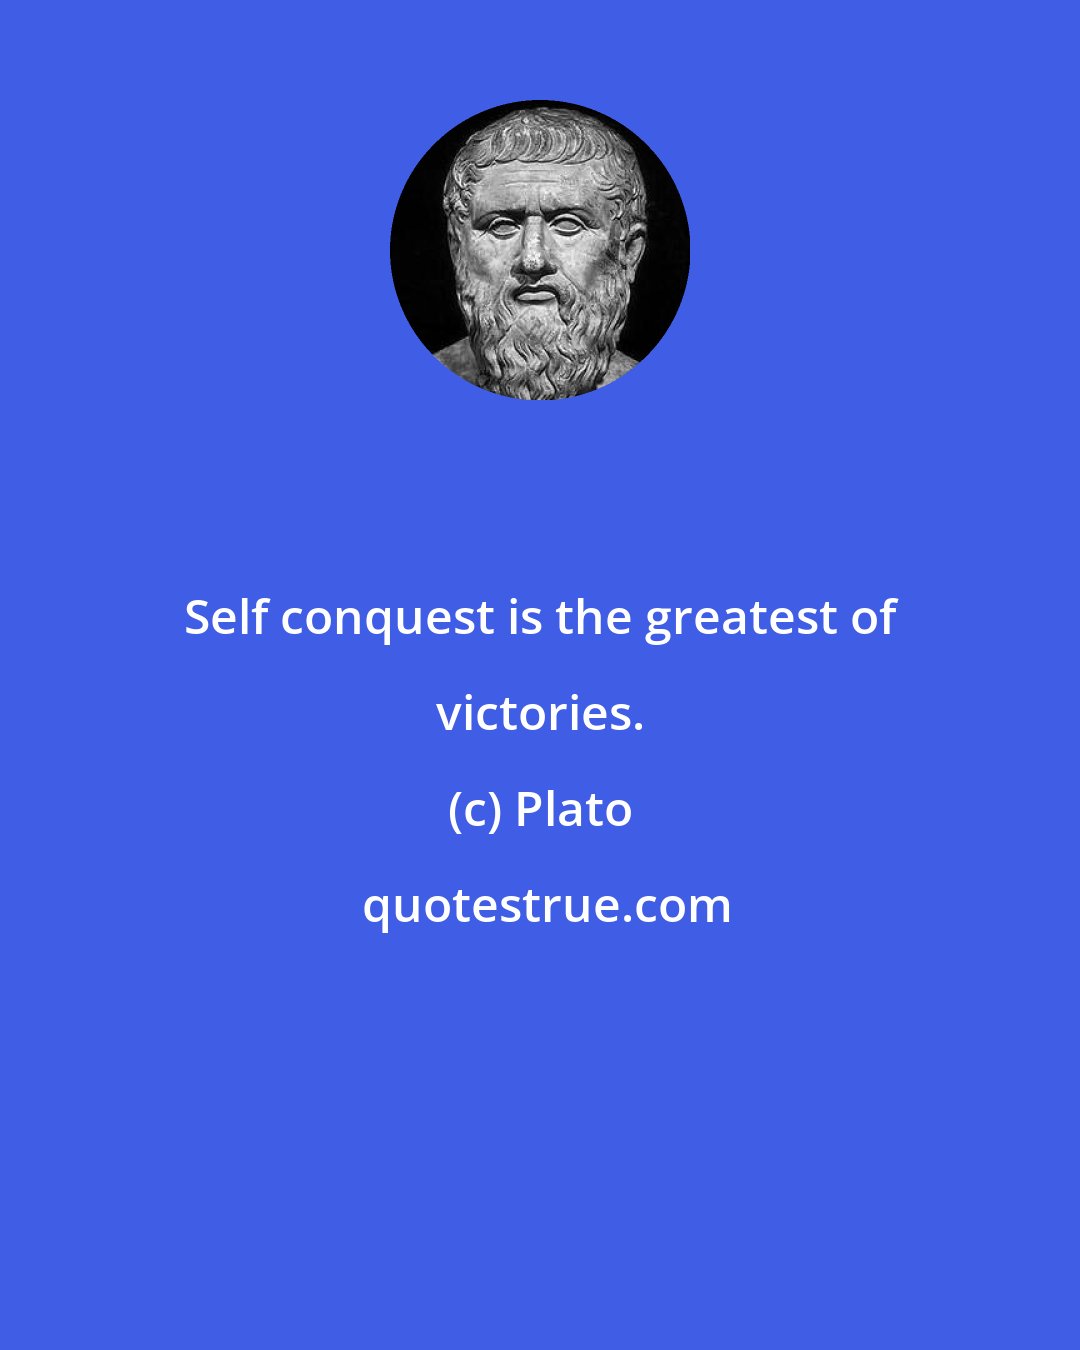 Plato: Self conquest is the greatest of victories.